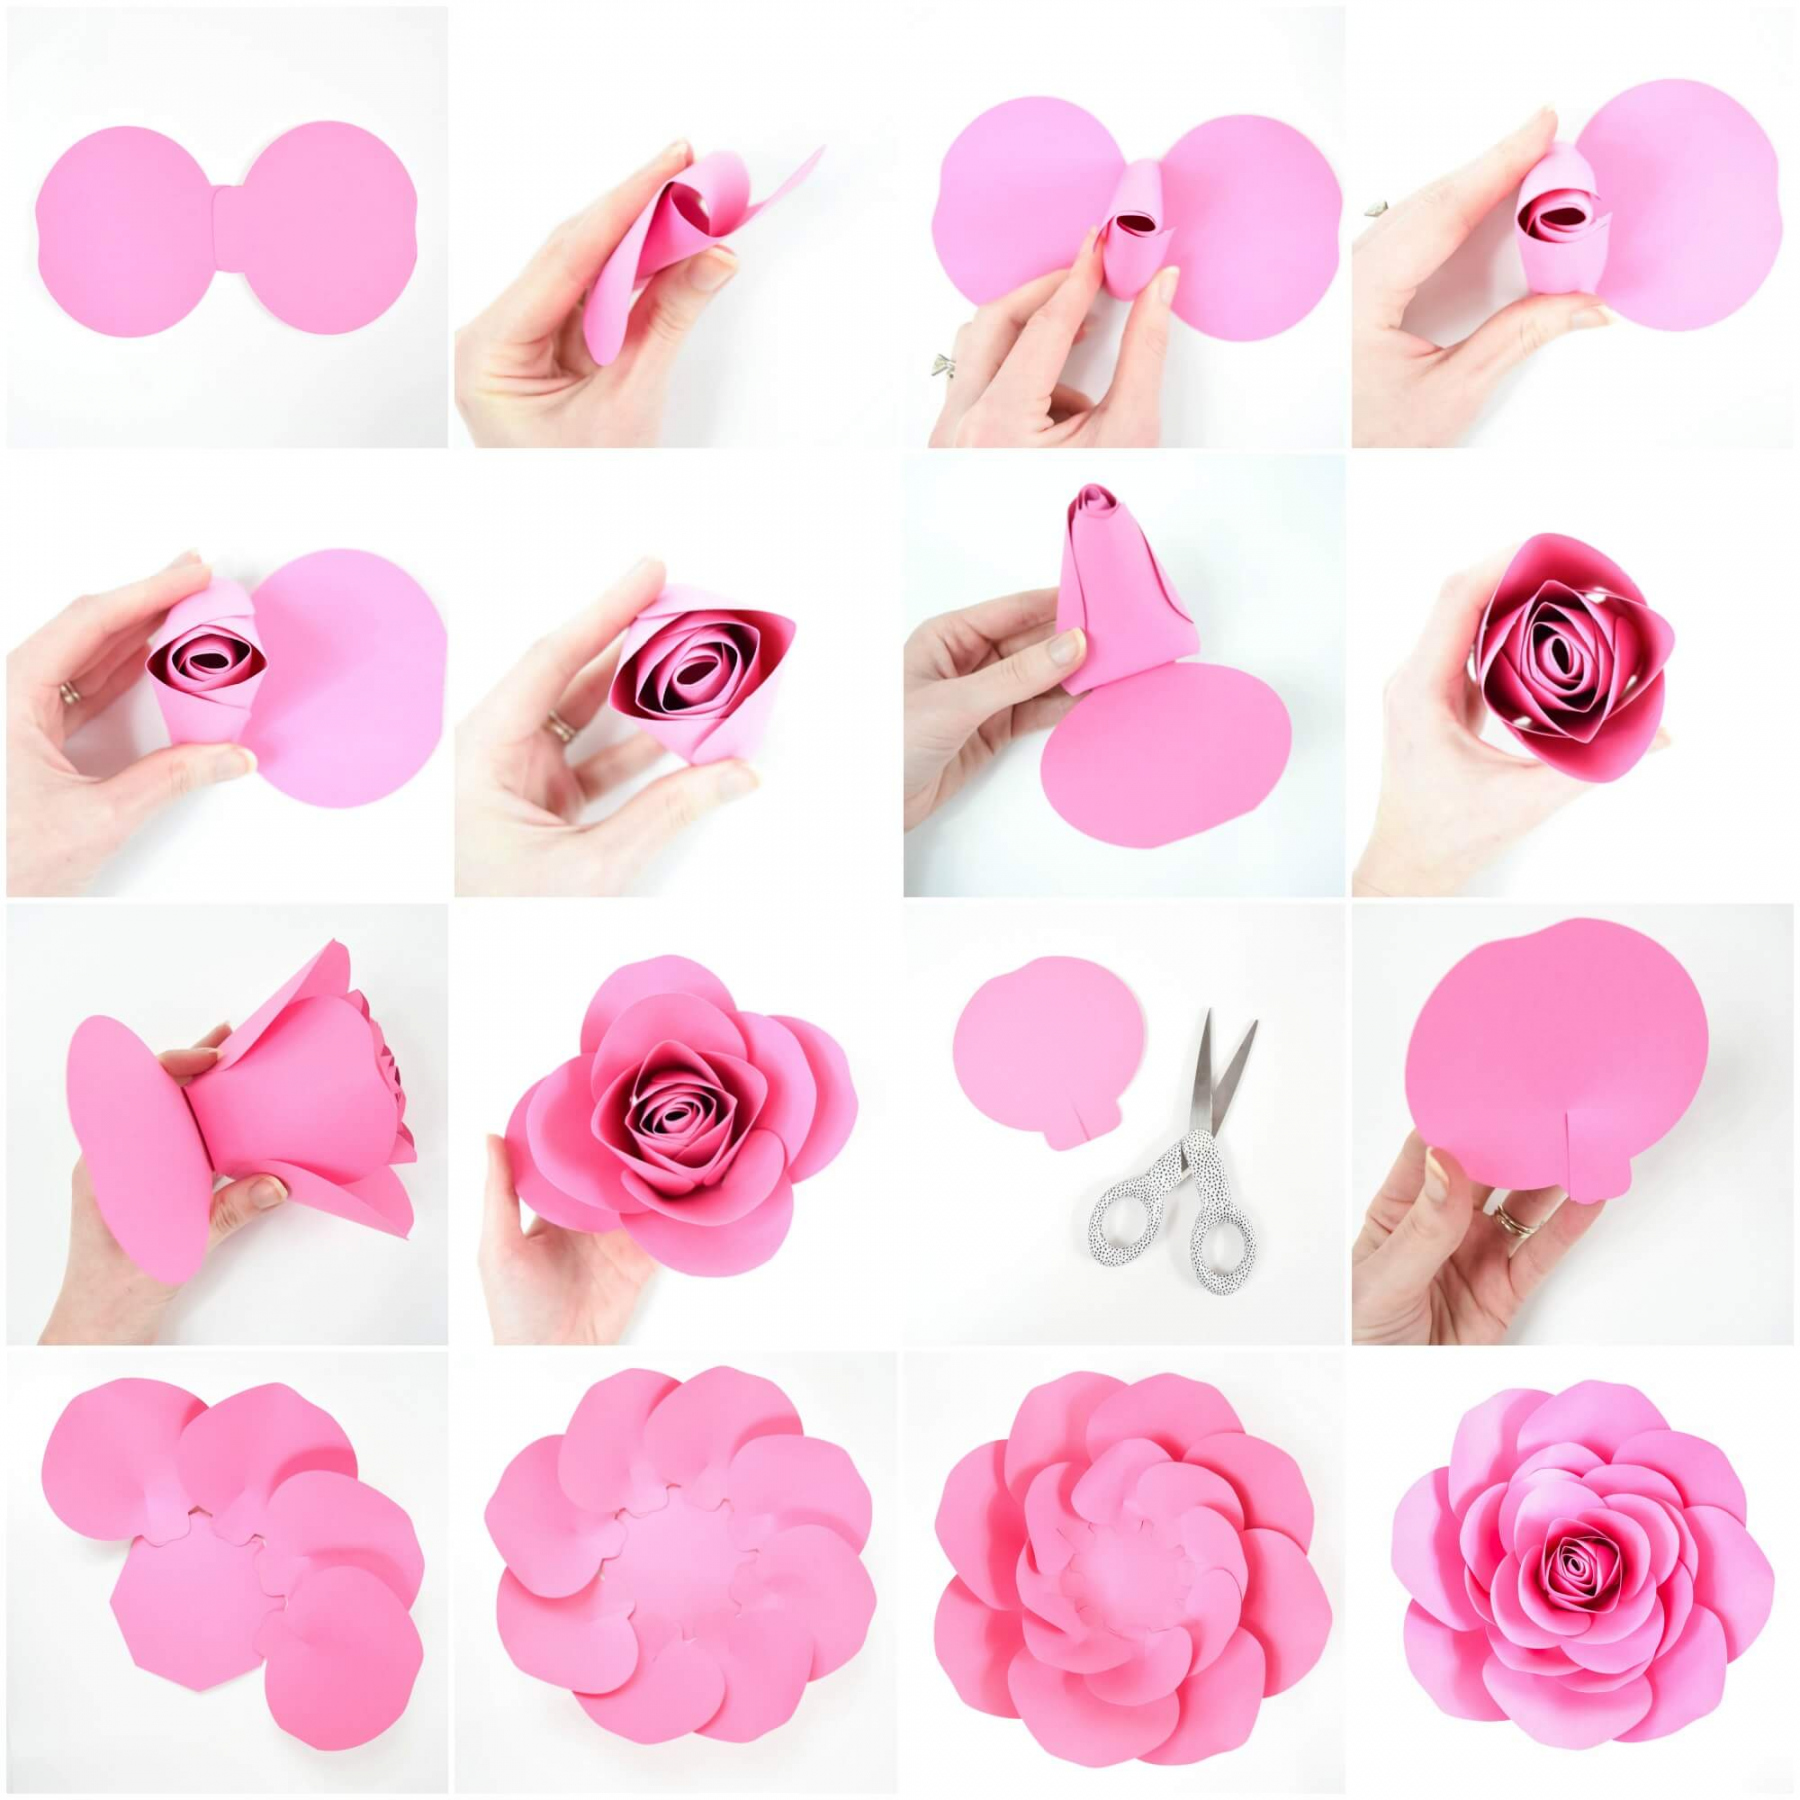 Free Large Paper Rose Template: DIY Camellia Rose Tutorial - FREE Printables - Printable Free Rose Paper Flower Template